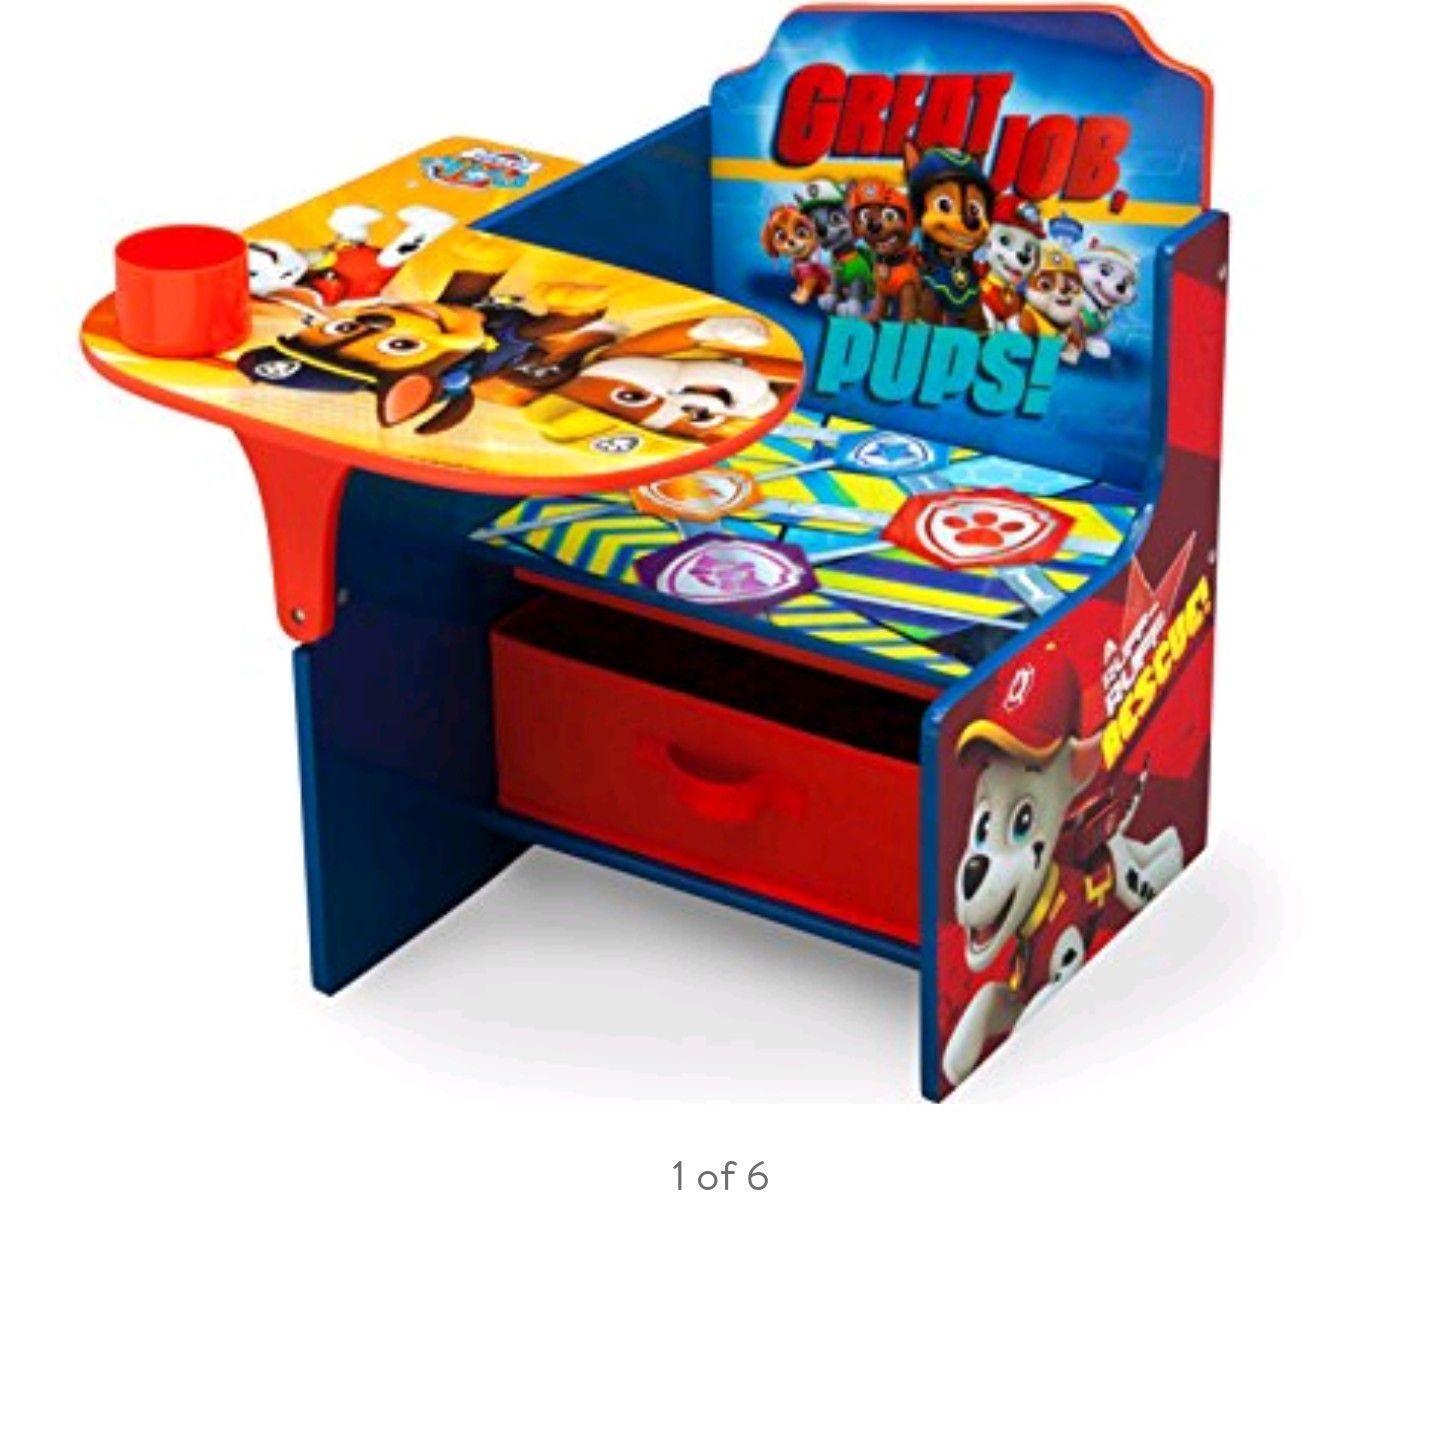 Paw Patrol Chair Desk - Brand New. Never Used. $15